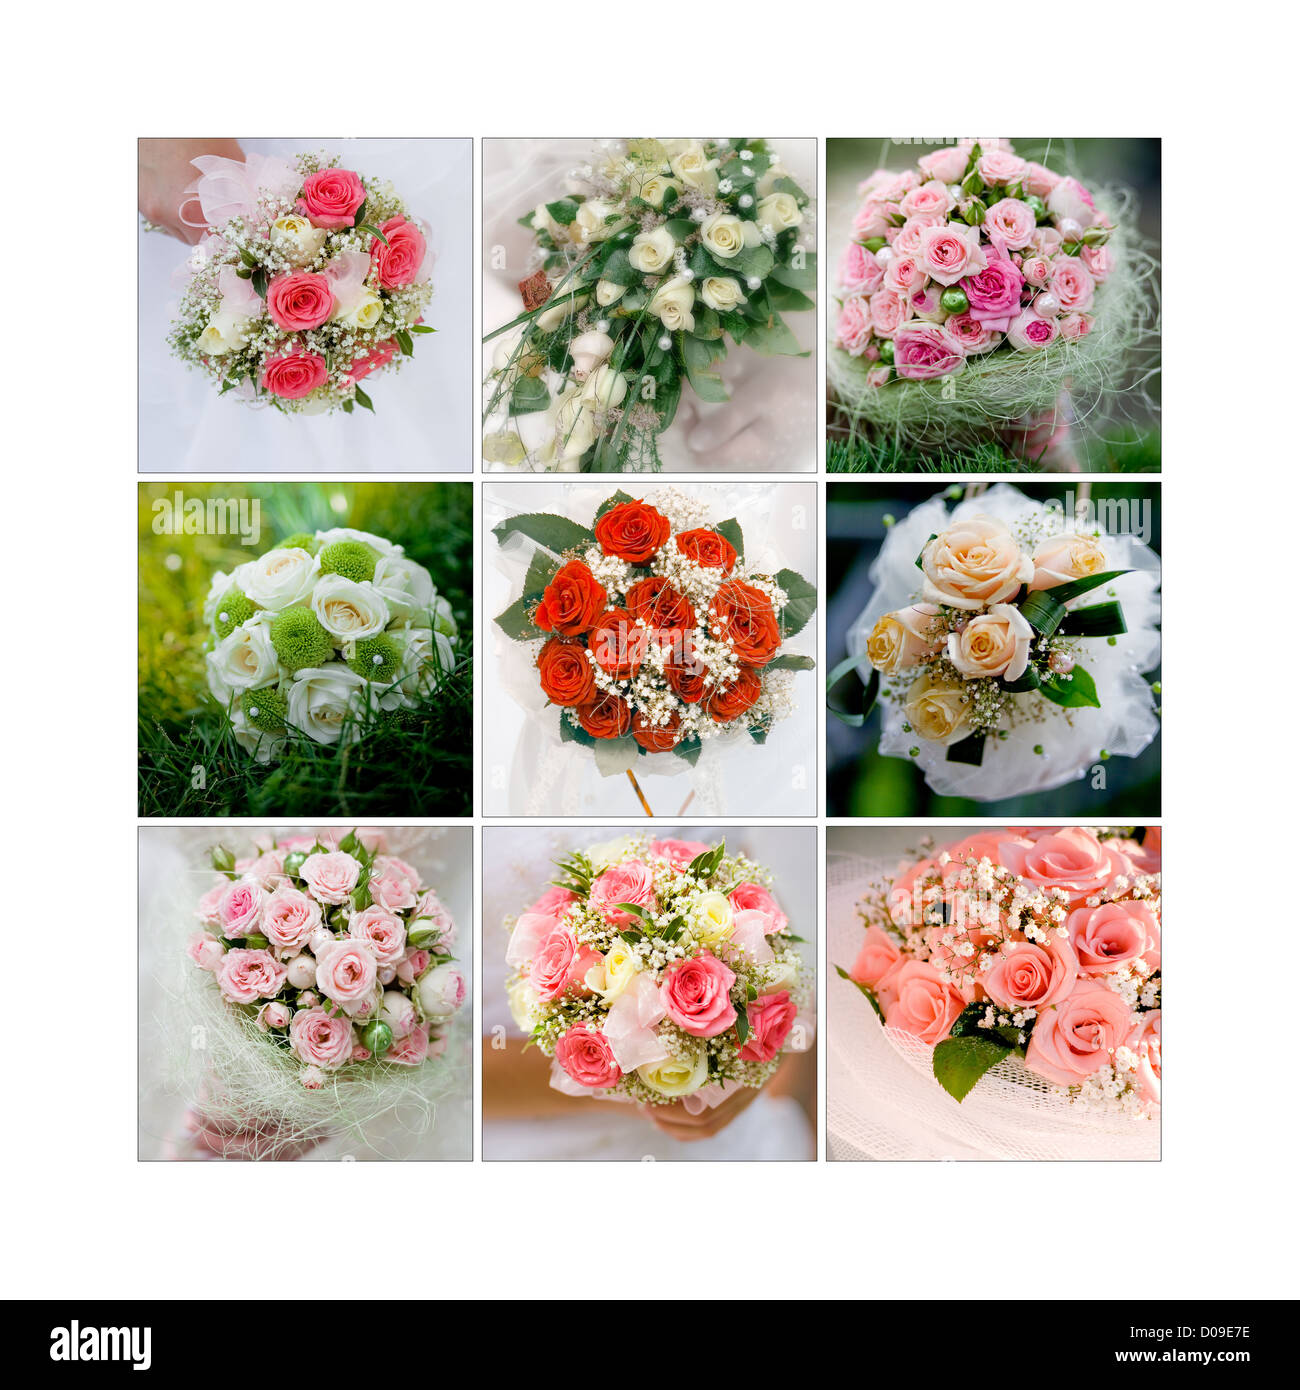 Collage with wedding bouquets Stock Photo